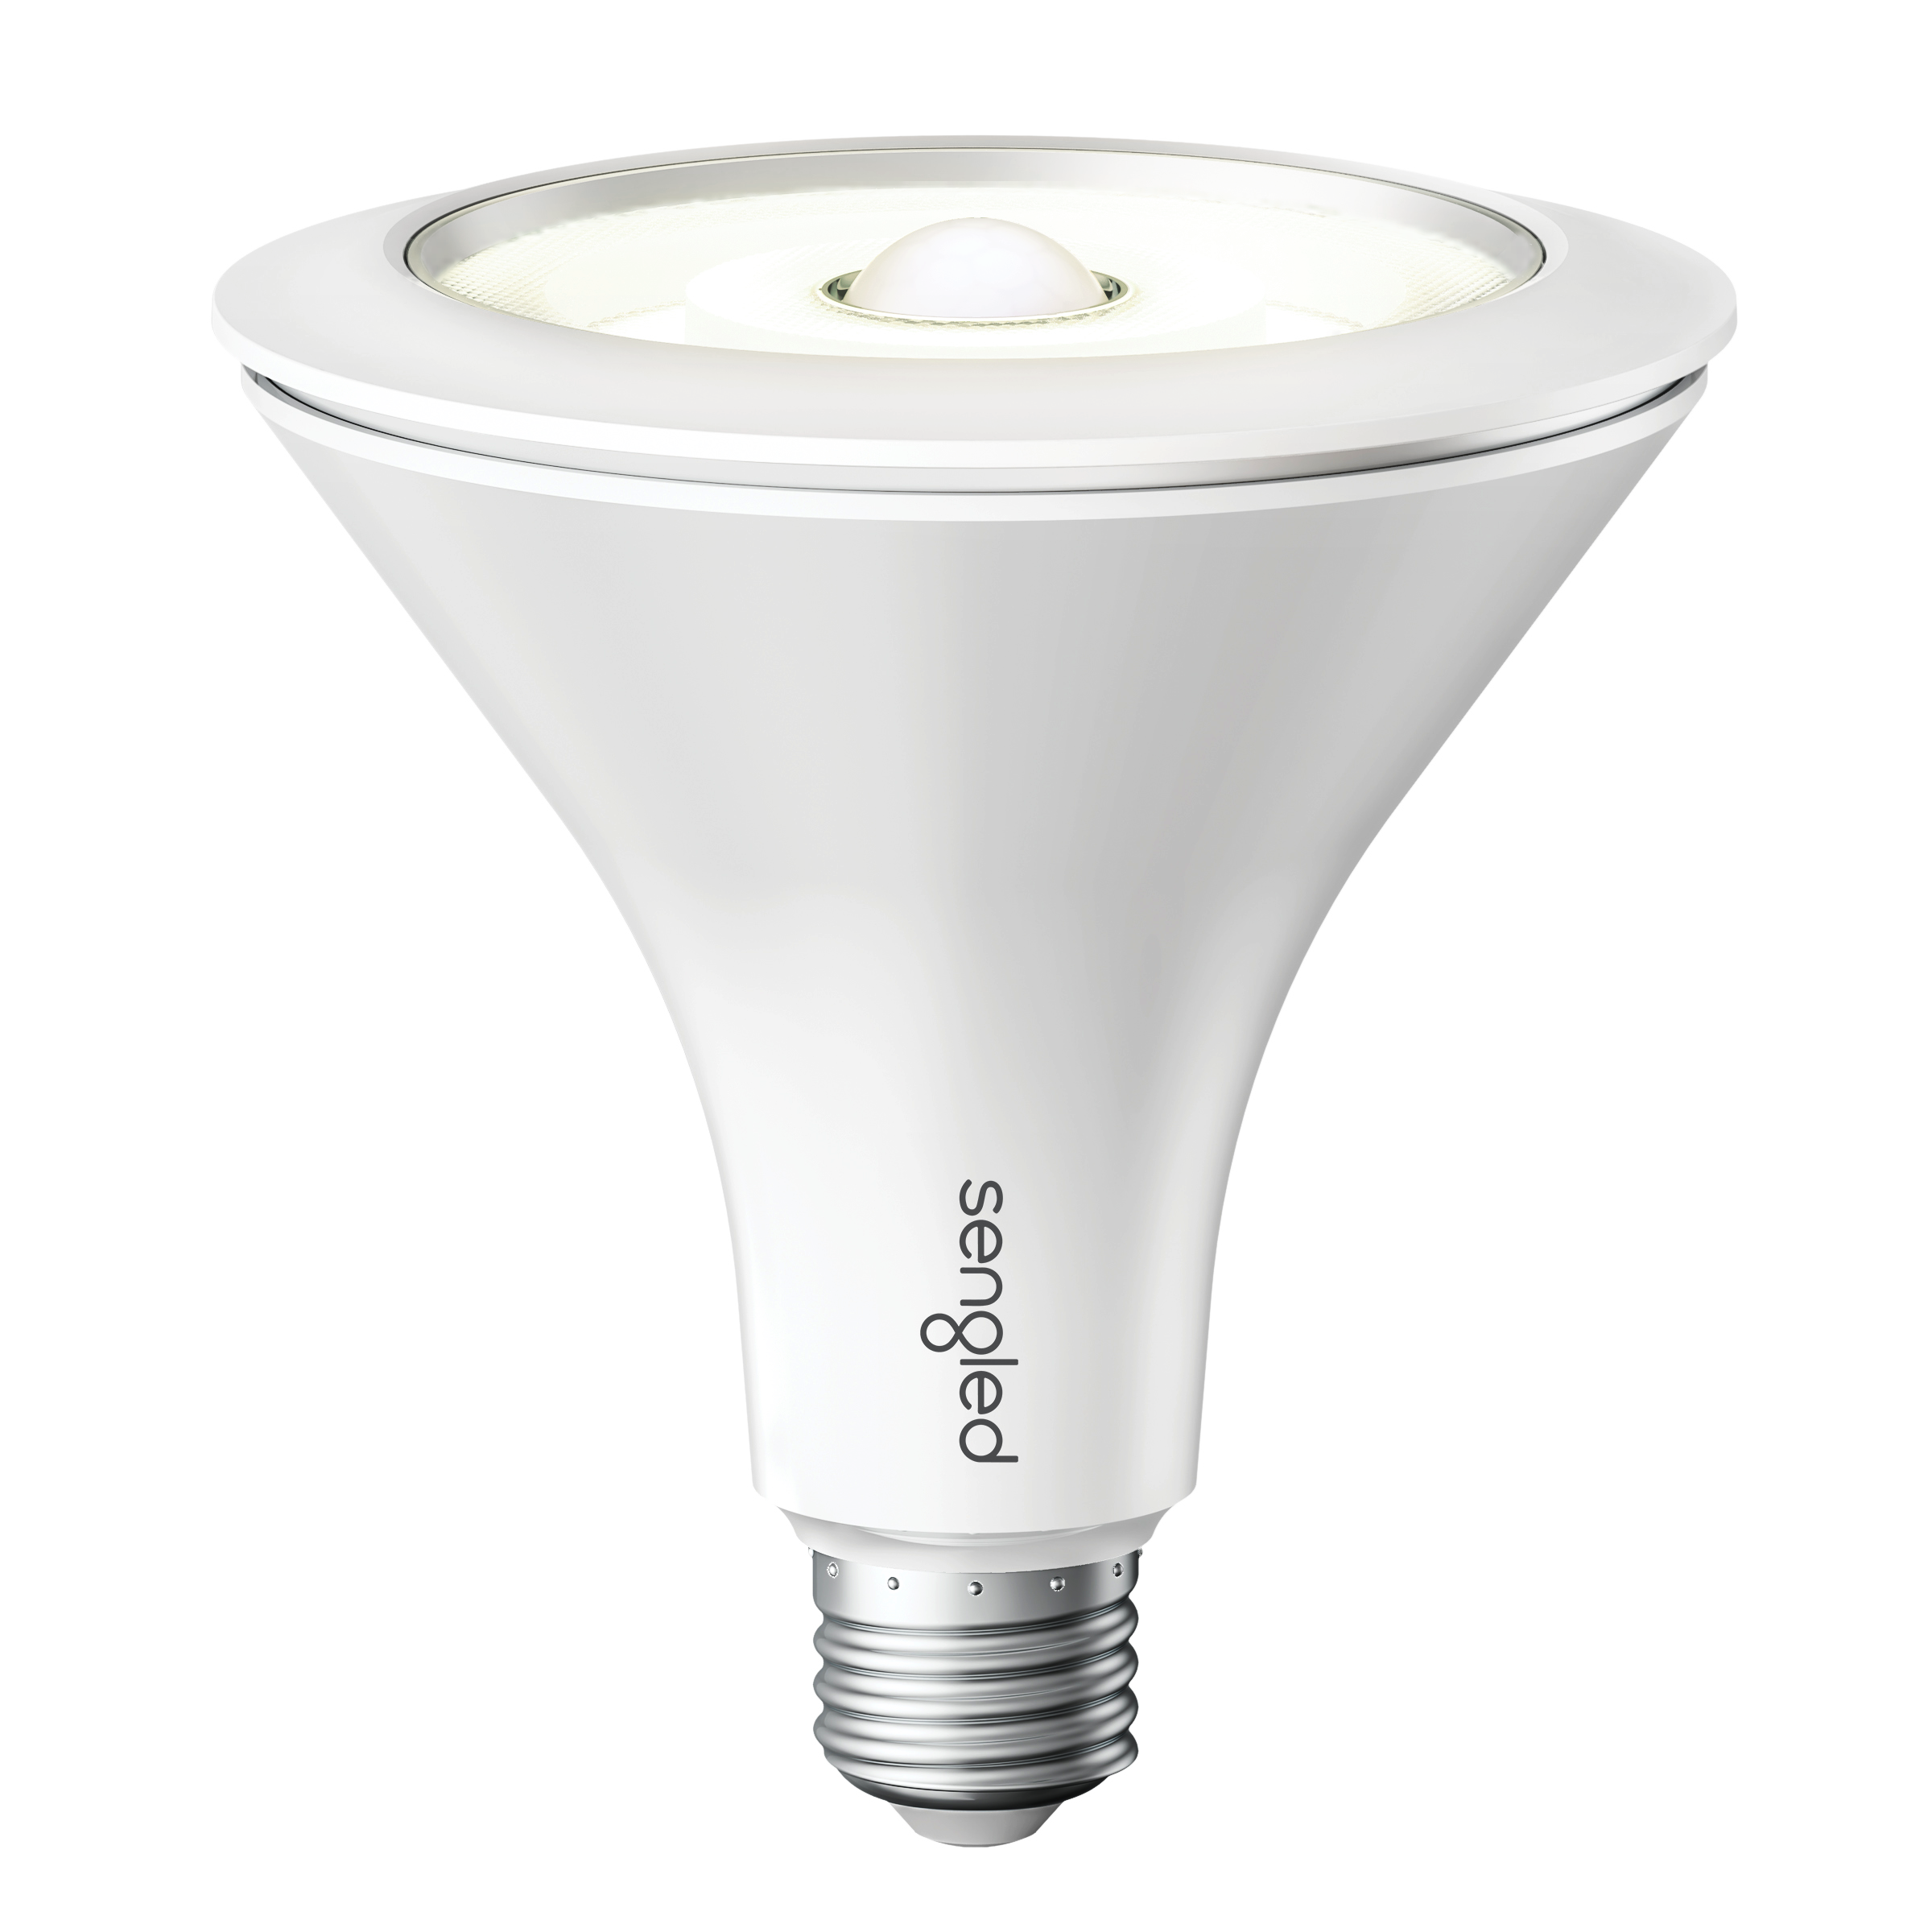 Smart Control: Easily control the Sengled Zigbee White 3000K PAR38/E26 and other Zigbee devices using the Sengled Home app or voice commands with popular voice assistants like Alexa, Google Assistant, SmartThings, and Apple HomeKit.